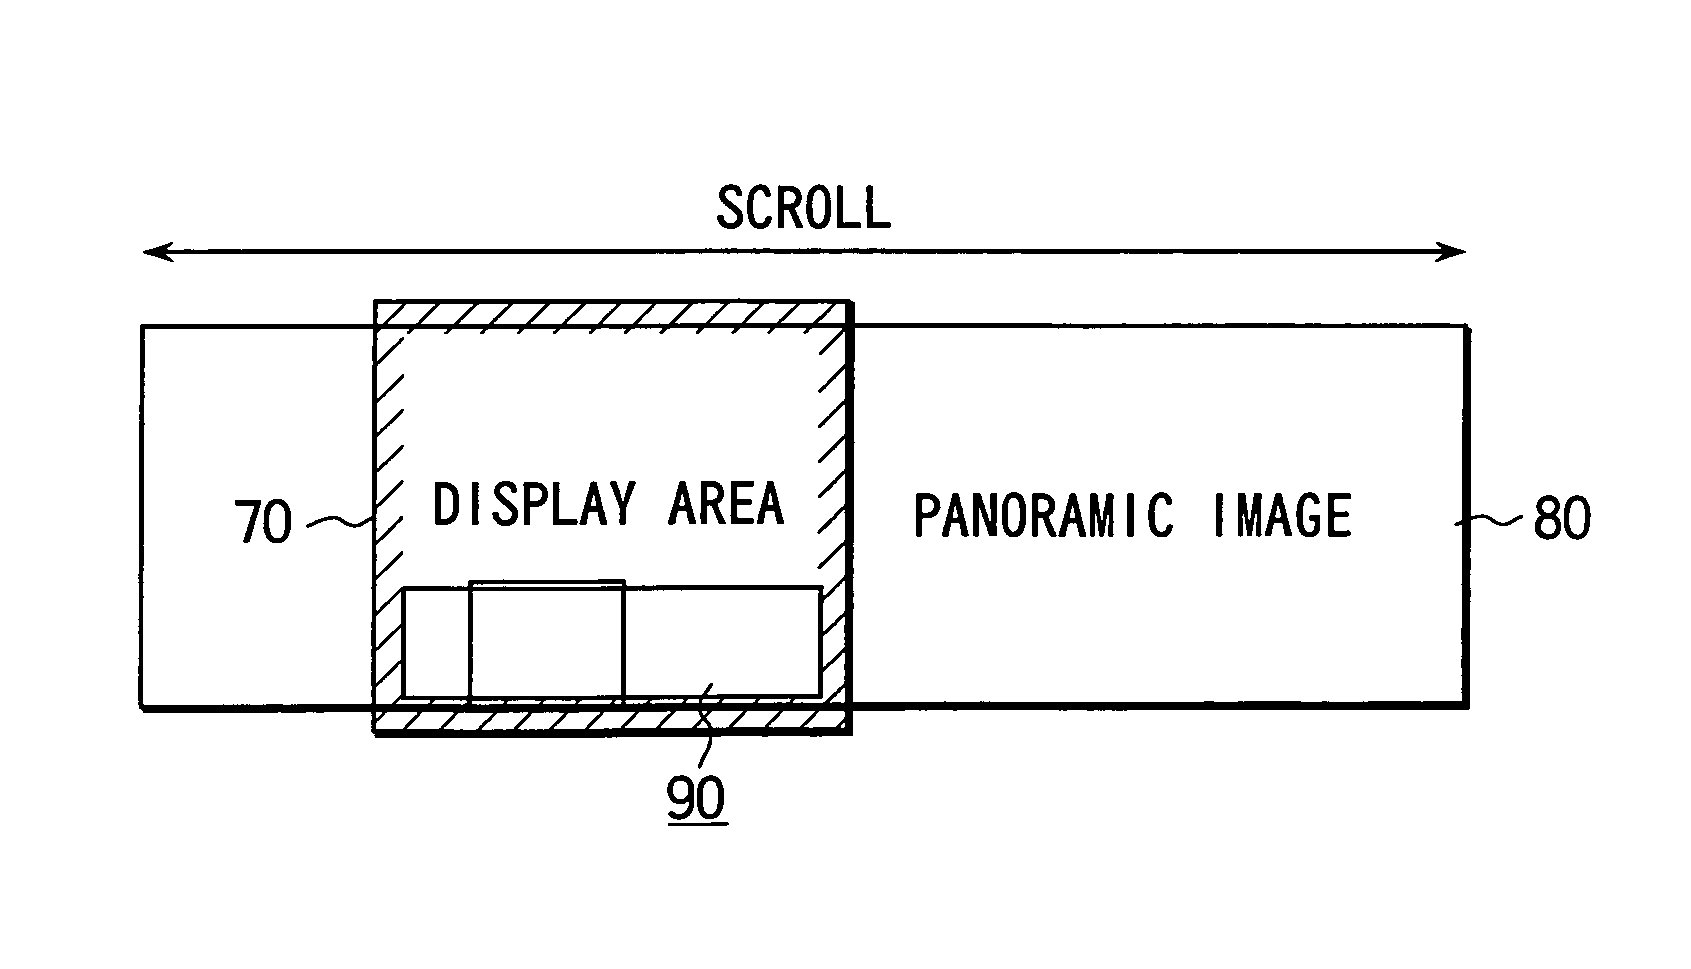 Image reproduction apparatus with panoramic mode based on aspect ratio